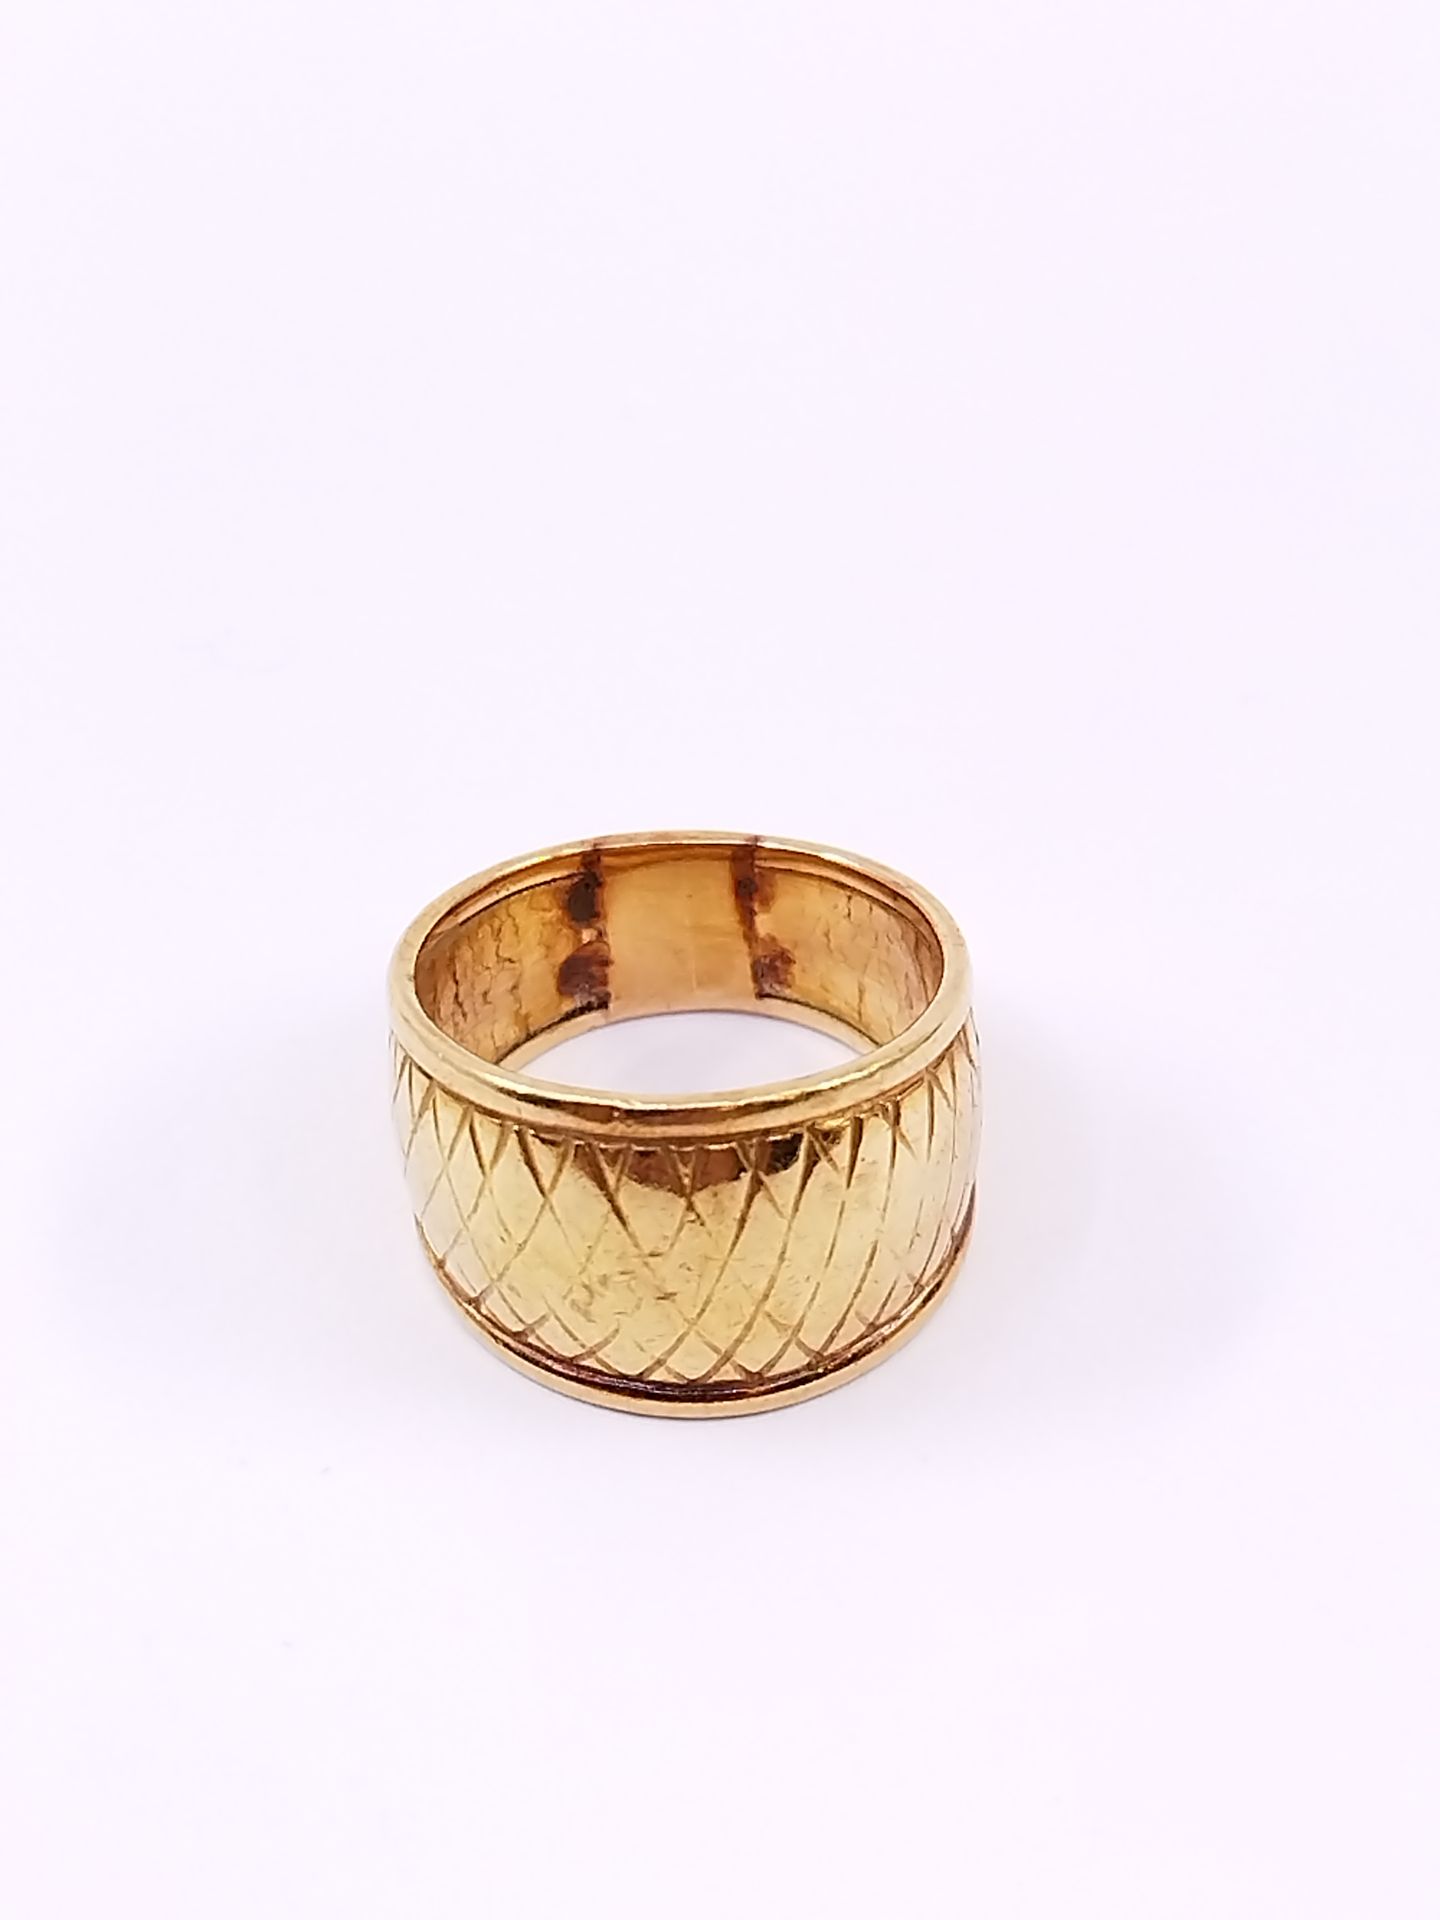 Null Ring in yellow gold 750 

Weight : 12,35 g 

TDD 55